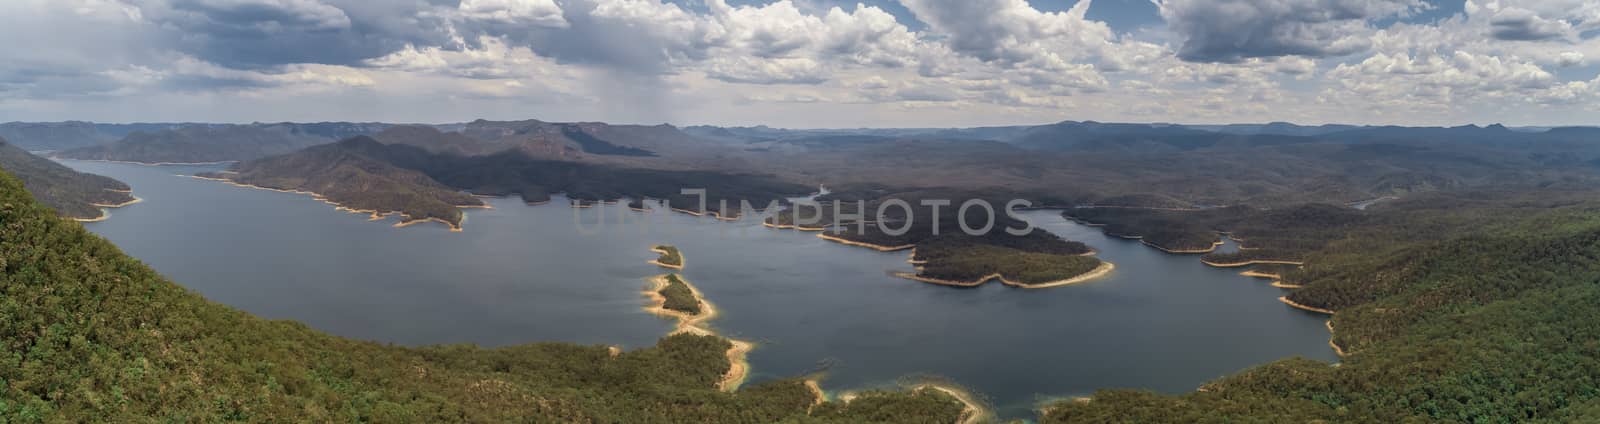 Lake Burragorang in The Blue Mountains in Australia by WittkePhotos